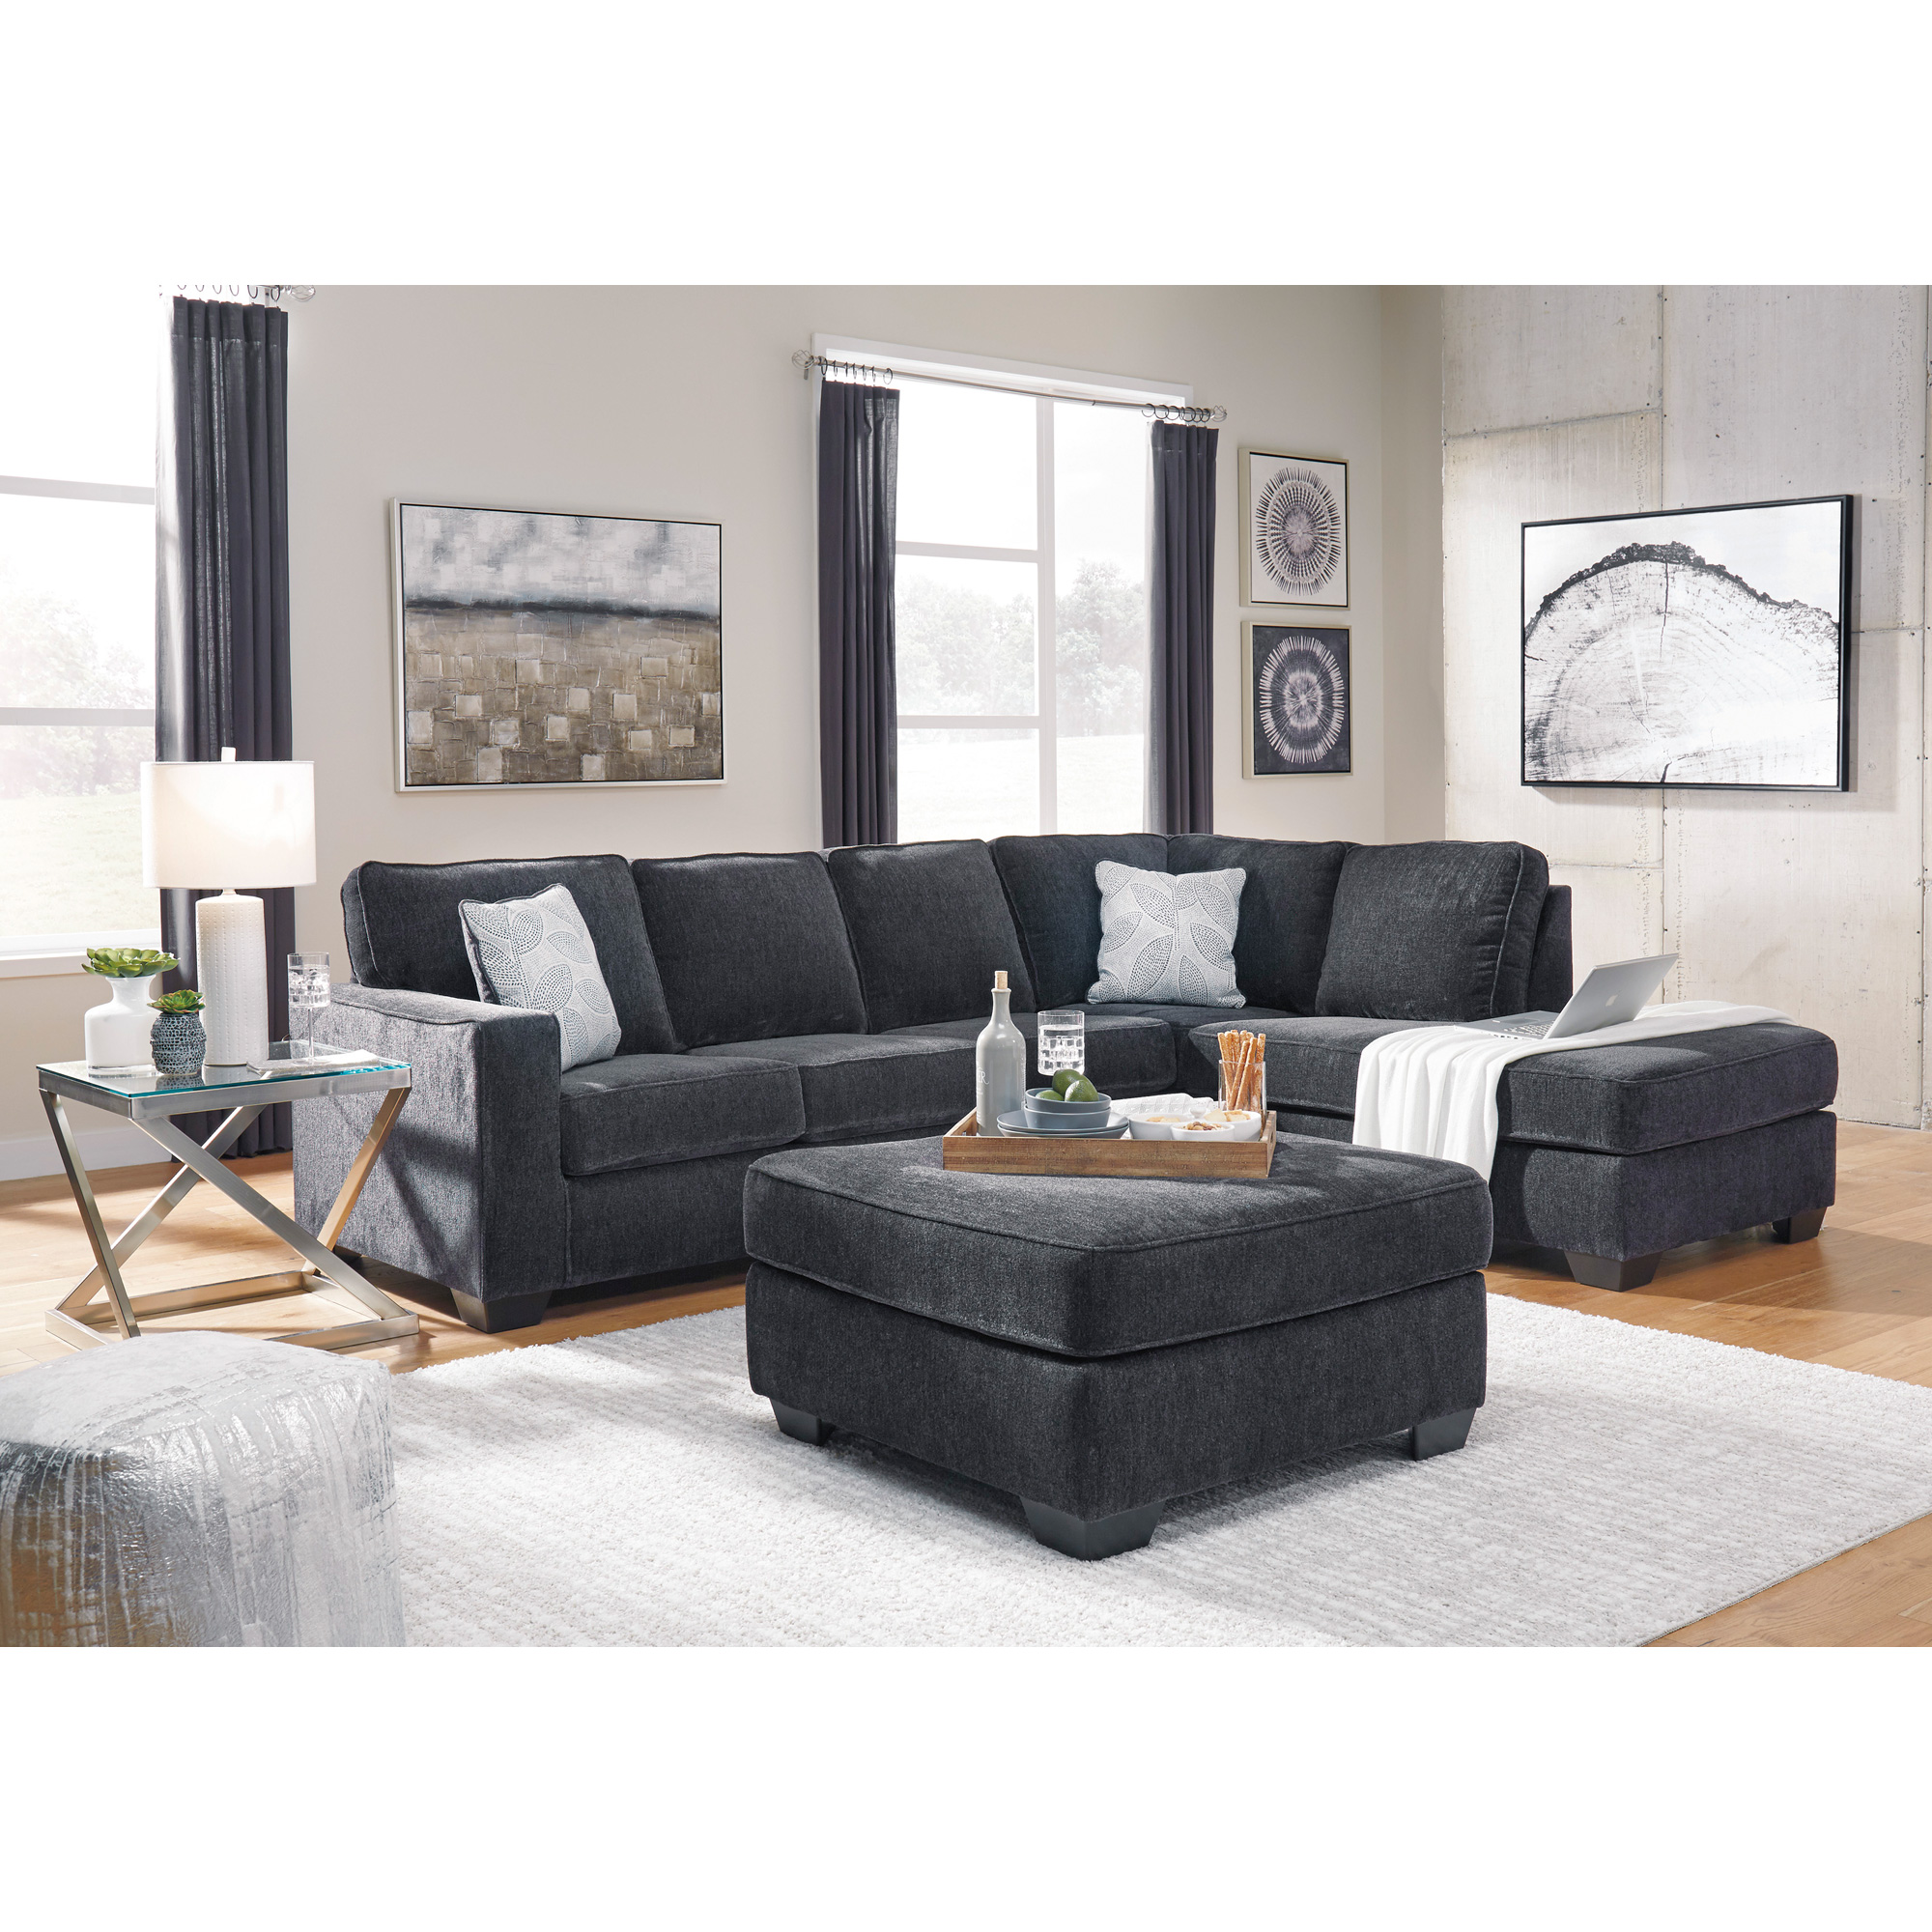 Riles Right Chaise Sectional Living